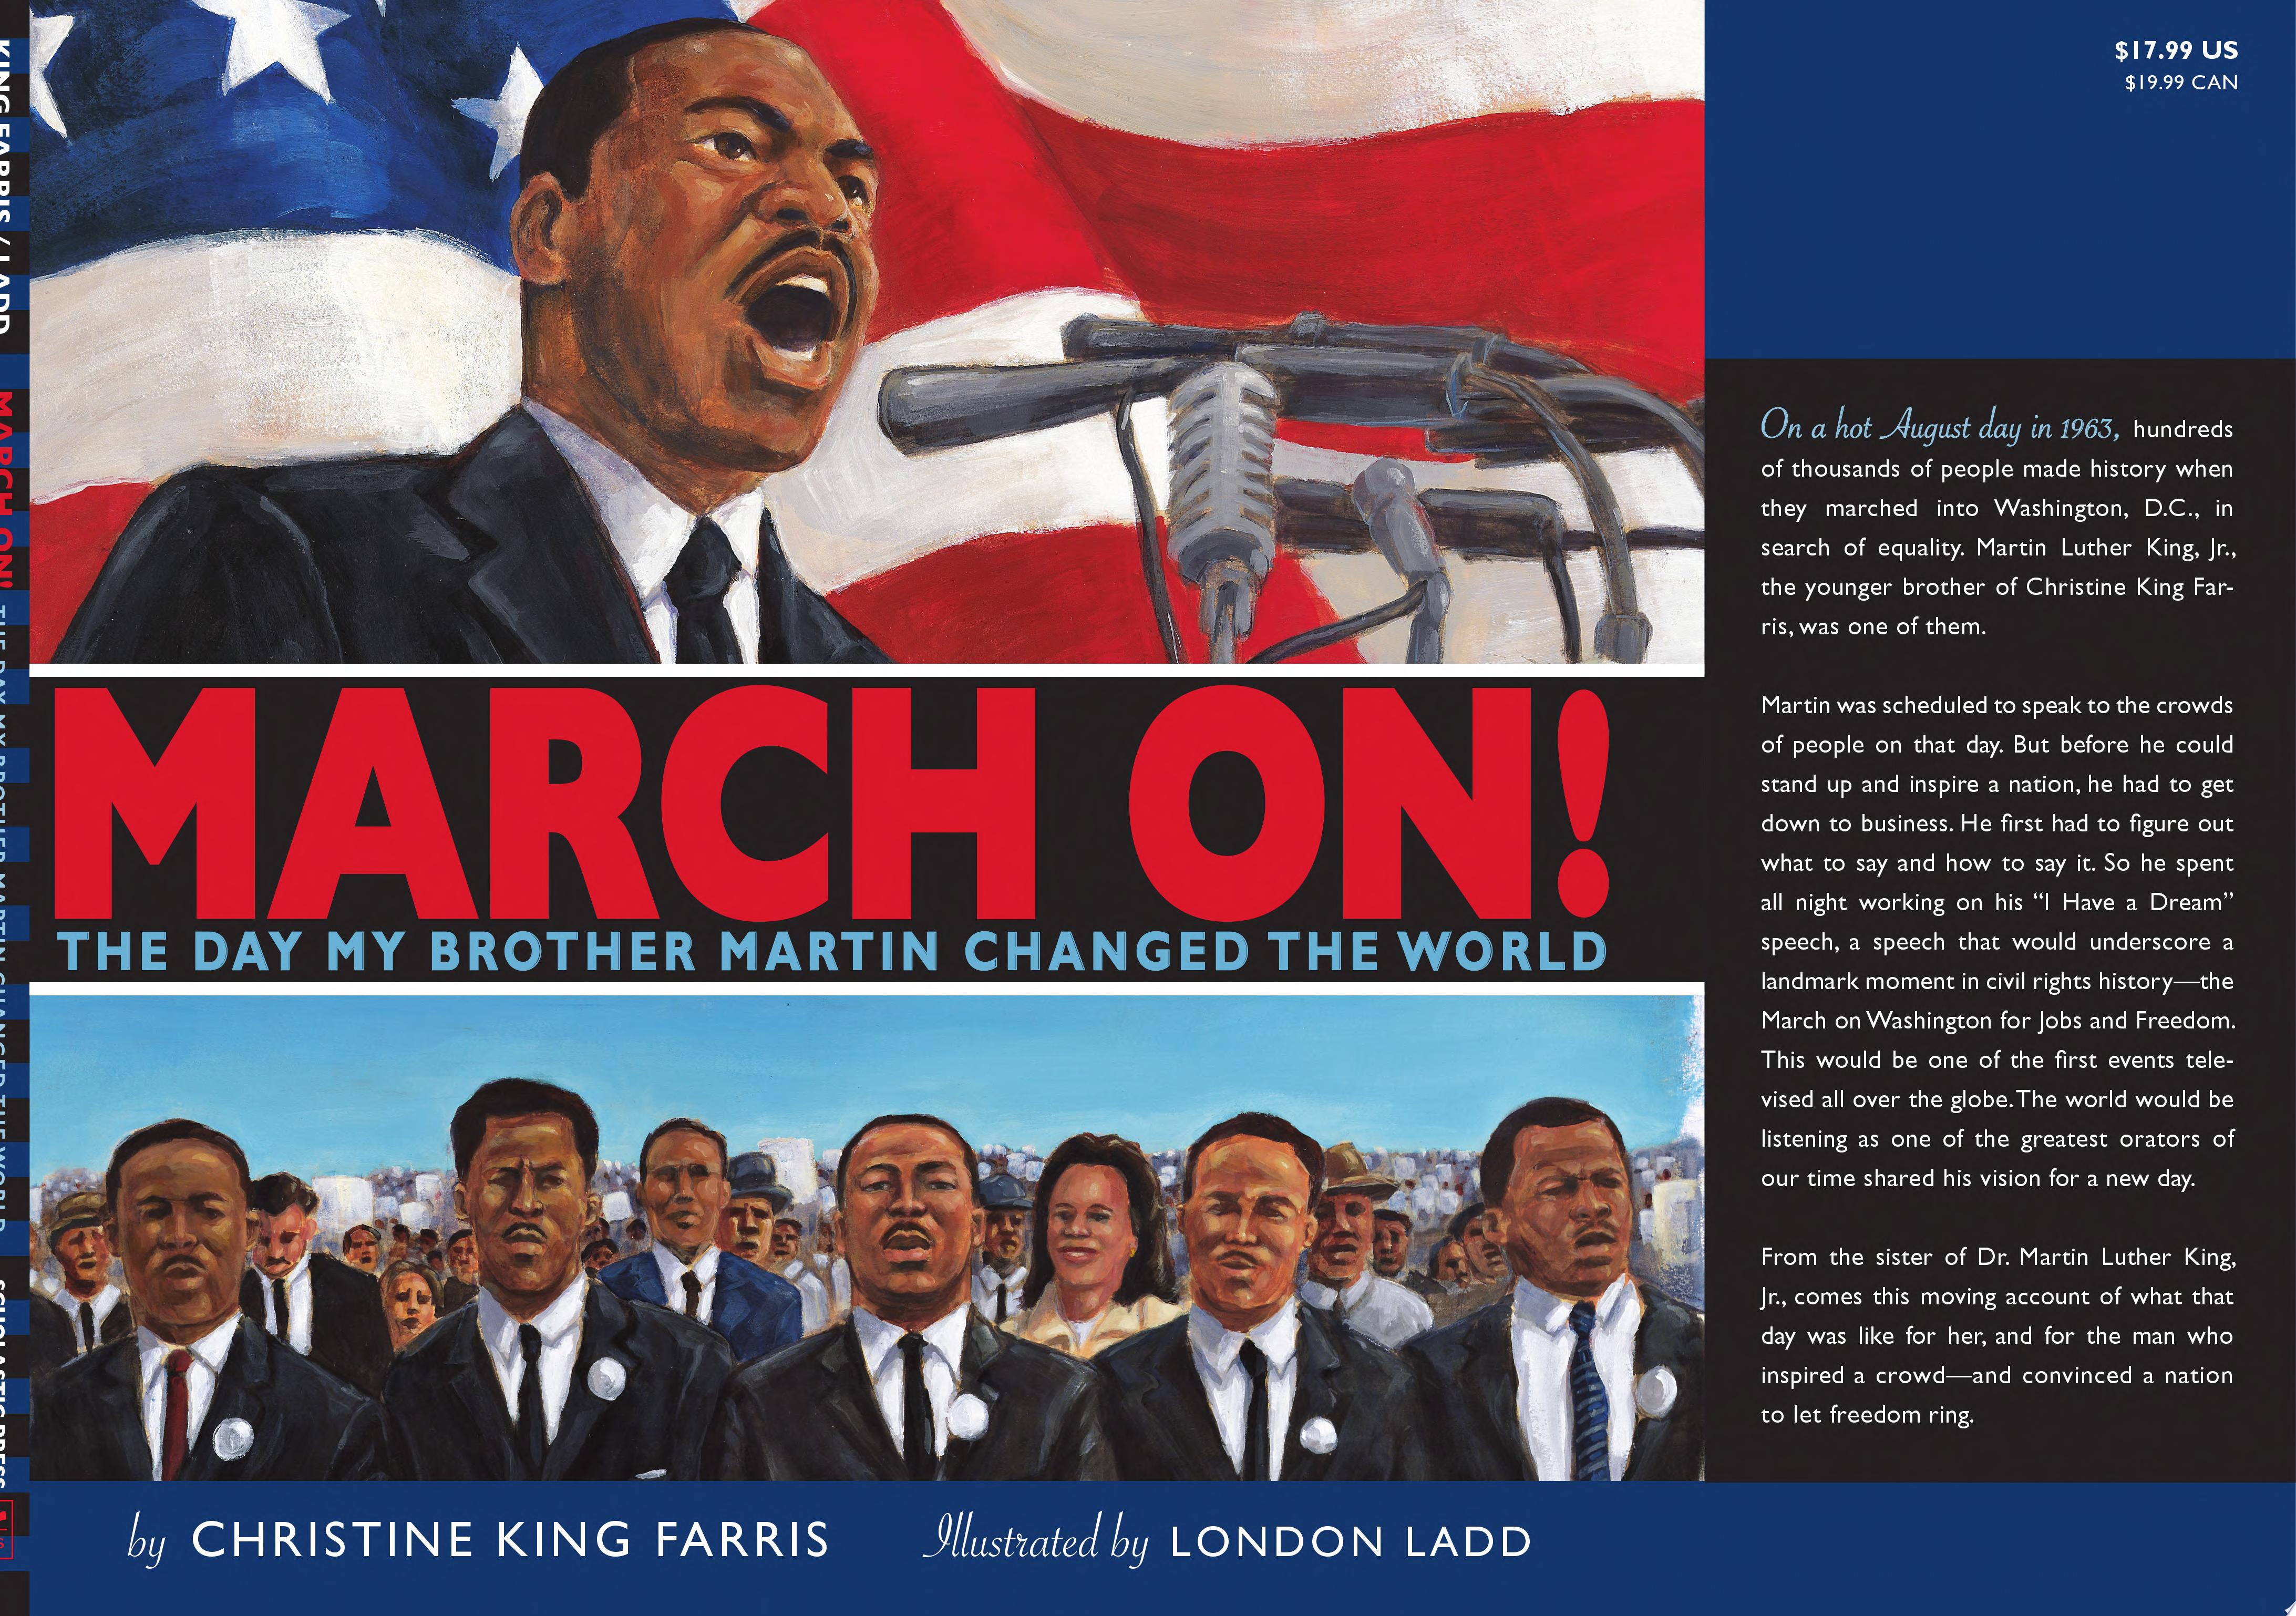 Image for "March On!"